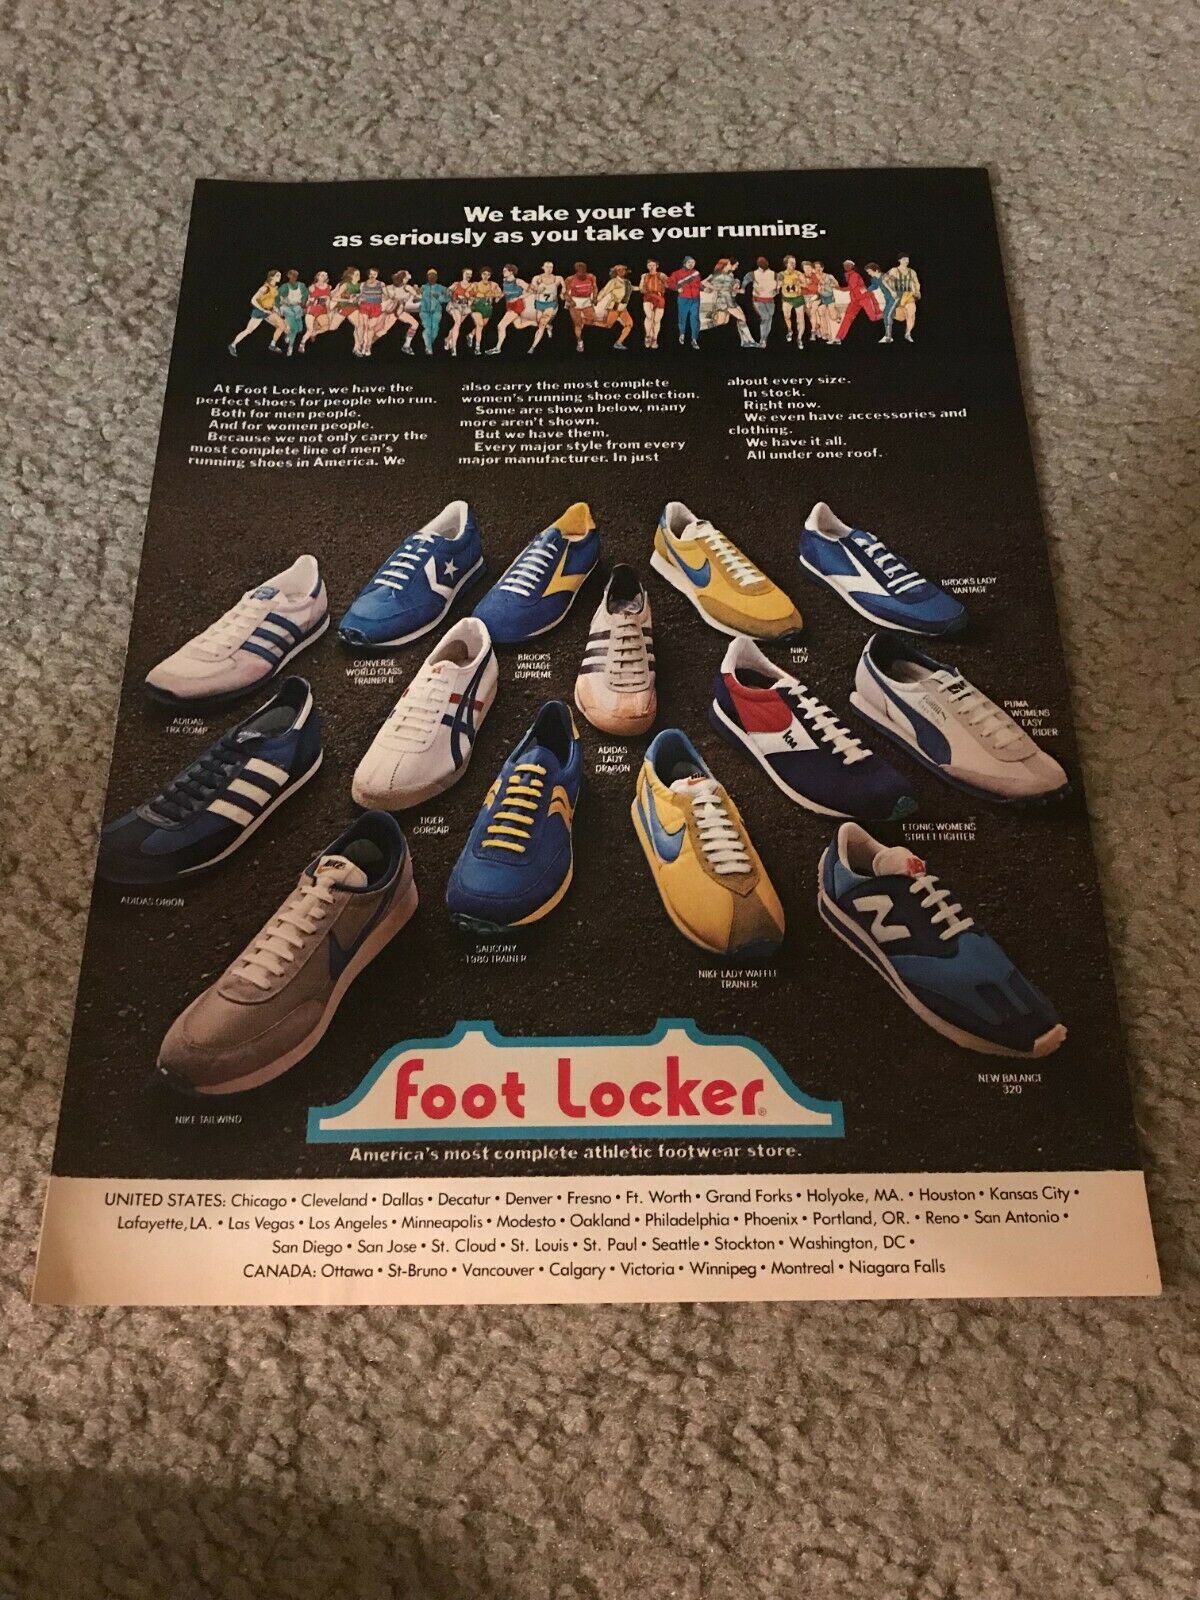 1978 FOOT LOCKER NIKE TAILWIND WAFFLE TRAINER LDV Shoes Poster Print Ad SAUCONY